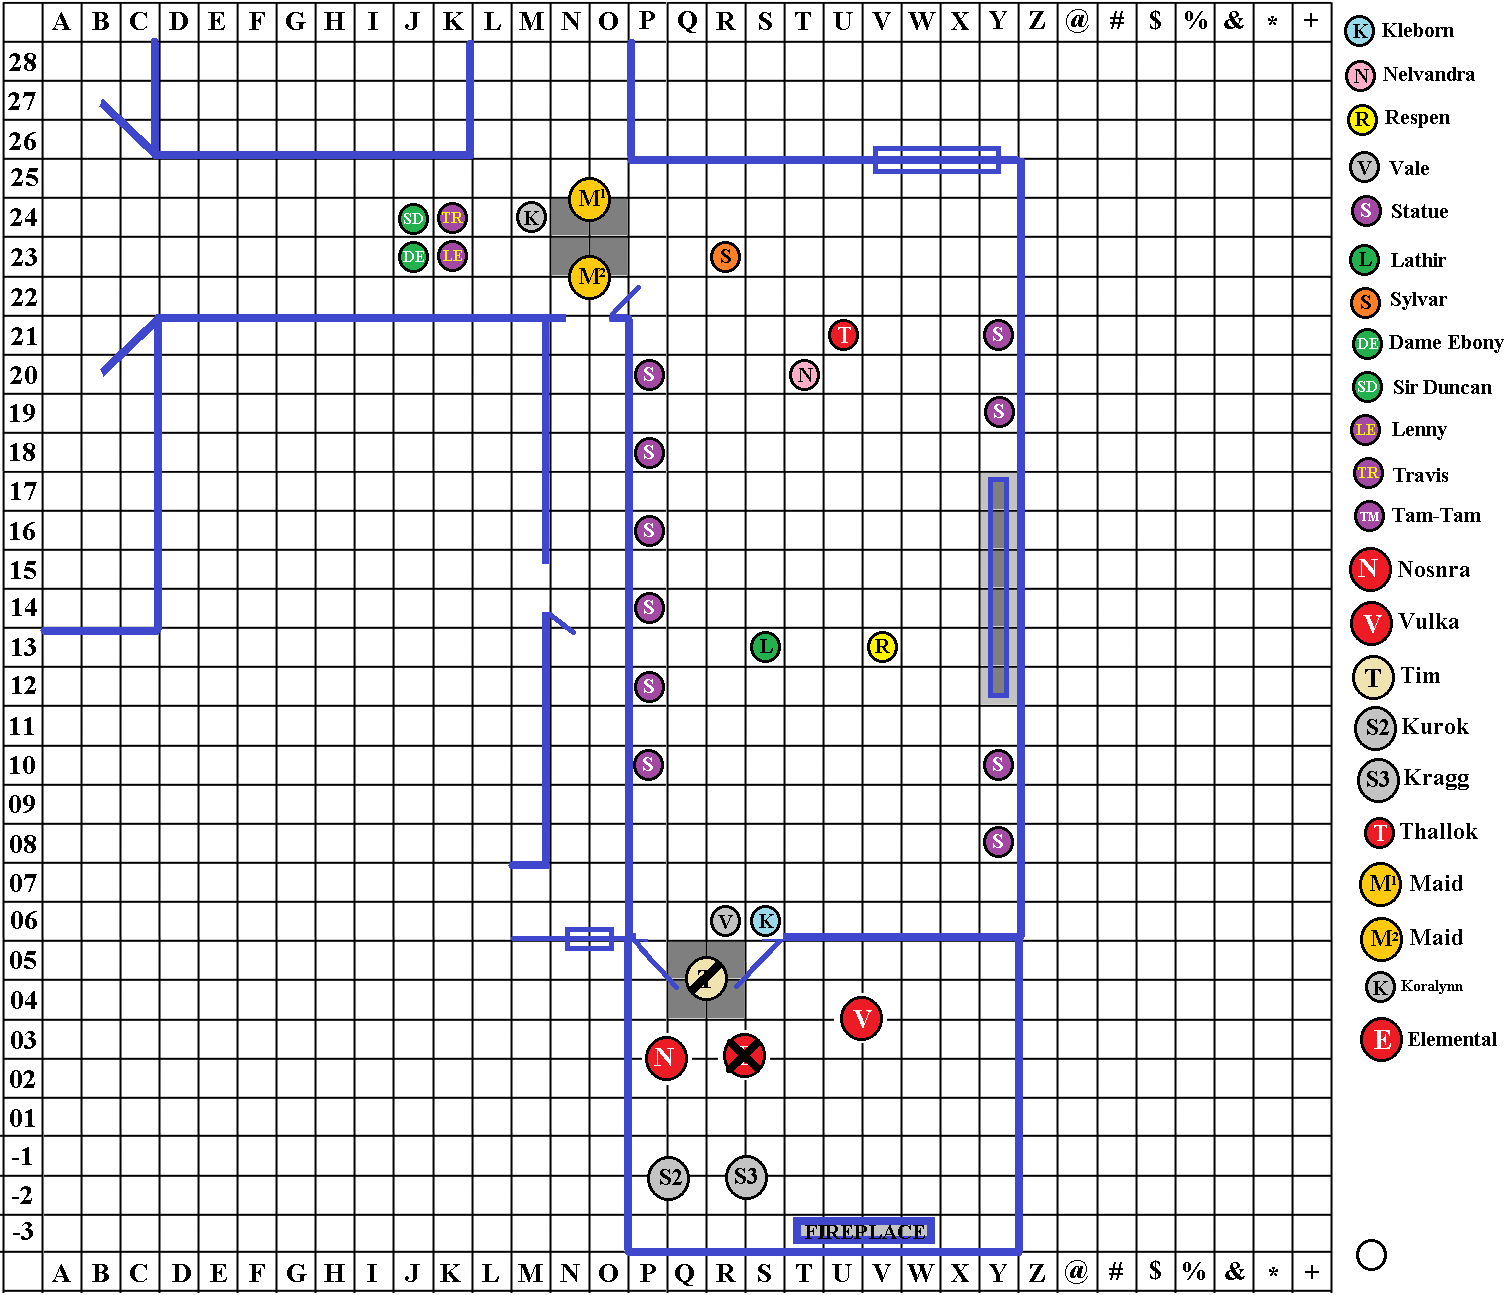 00-Giant-Steading-Hallway-Map-001-A6b5b2.png